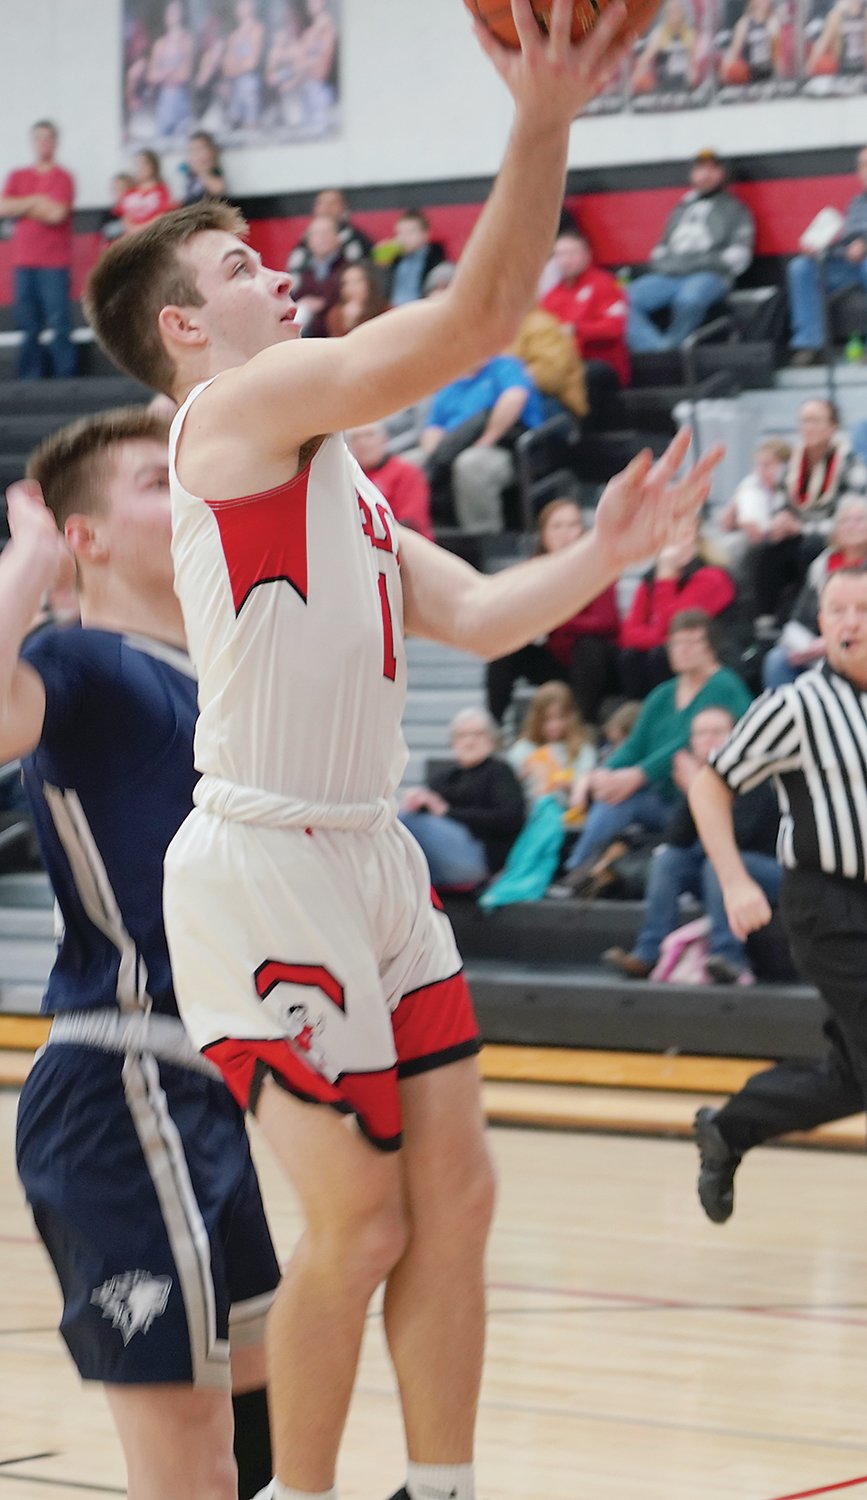 ELC senior Ryan Schiltz scored all 18 of his points in the second half against Western Christian, but the Wolfpack prevailed over the Midgets, 68-58, on Tuesday.
Photo by David Swartz